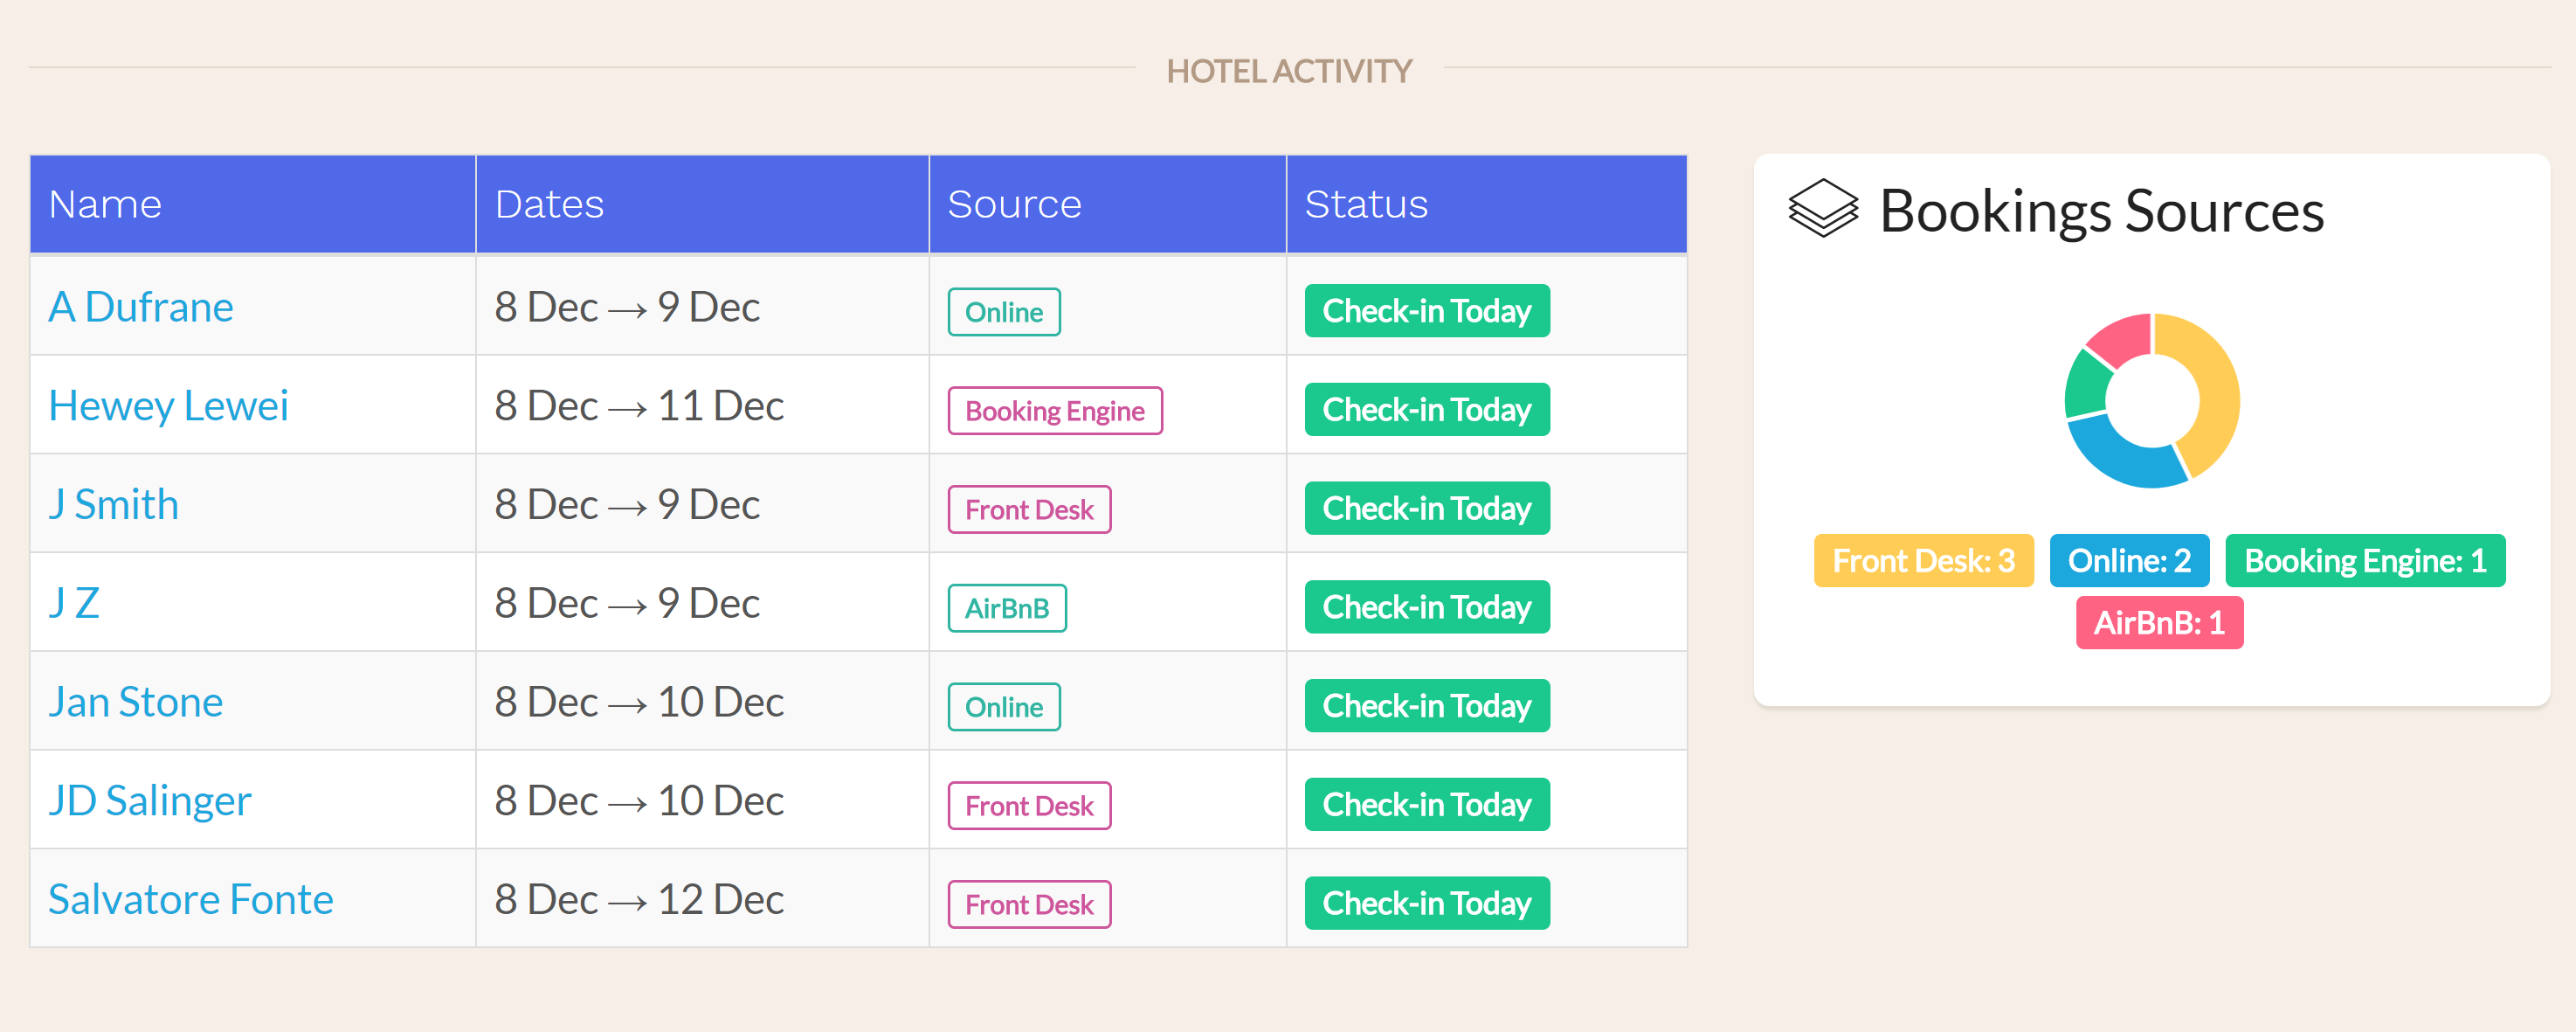 Hotel Charts & Graphs In our latest update to the Front Desk manager, we have added charts and graphs throughout the application to allow hoteliers to get an idea of booking sources and revenue distribution at a glance. There is no need to export your data to generate visual analysis of your hotel’s business.